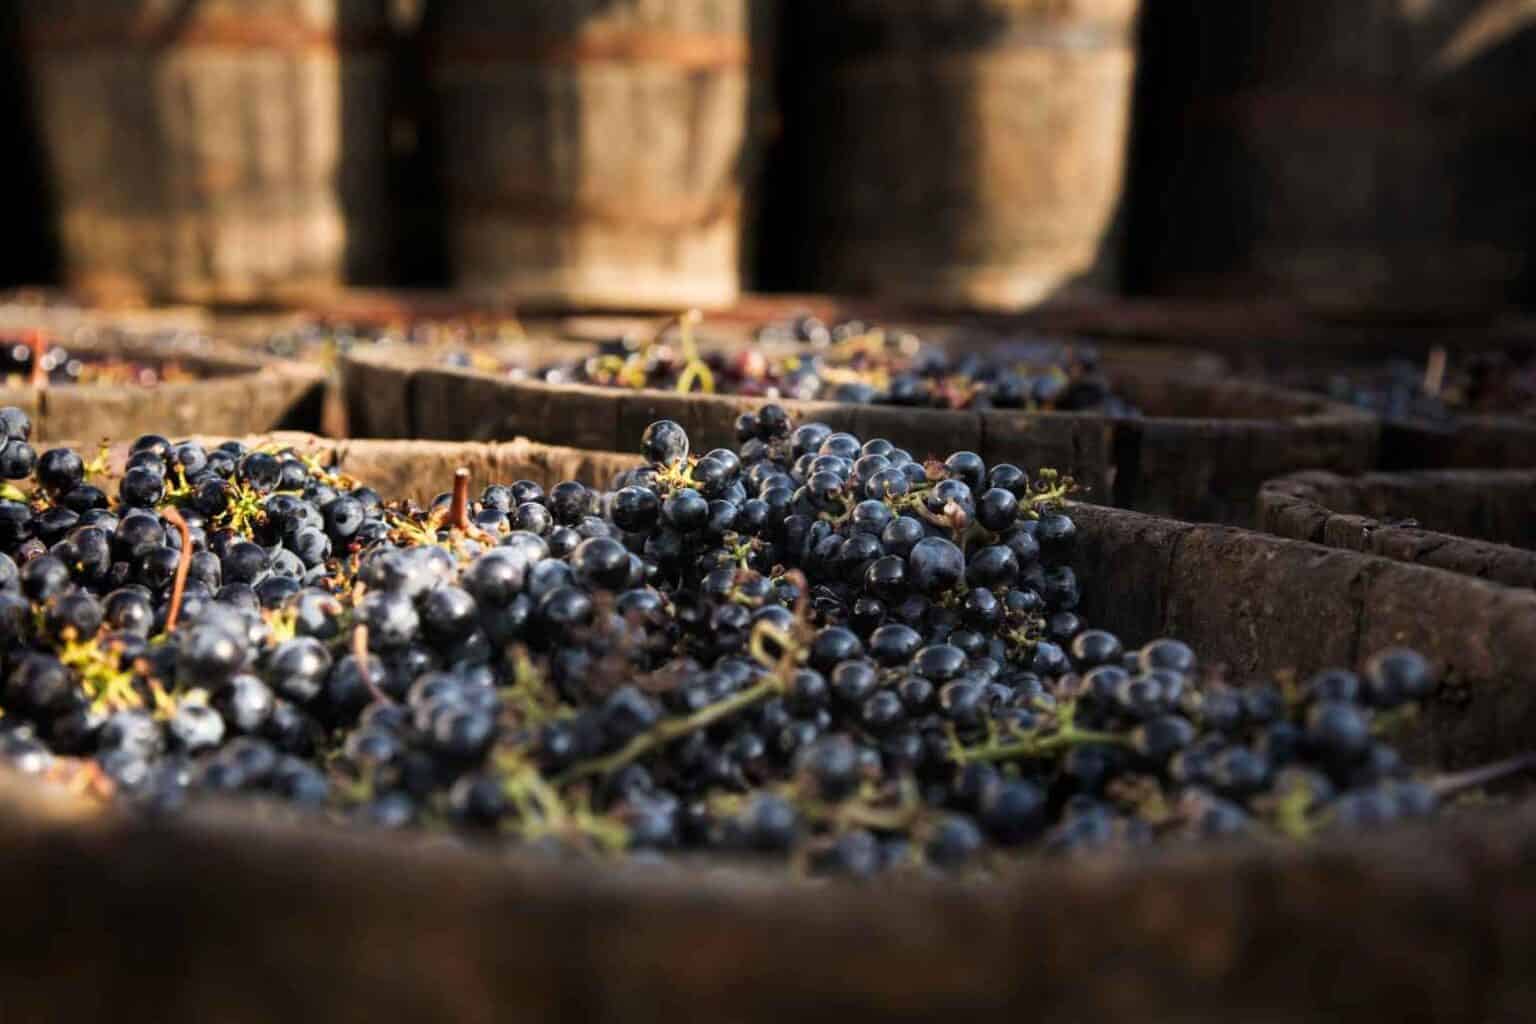 Grenache Wine  Unraveling What is Garnacha Red Wine – Usual